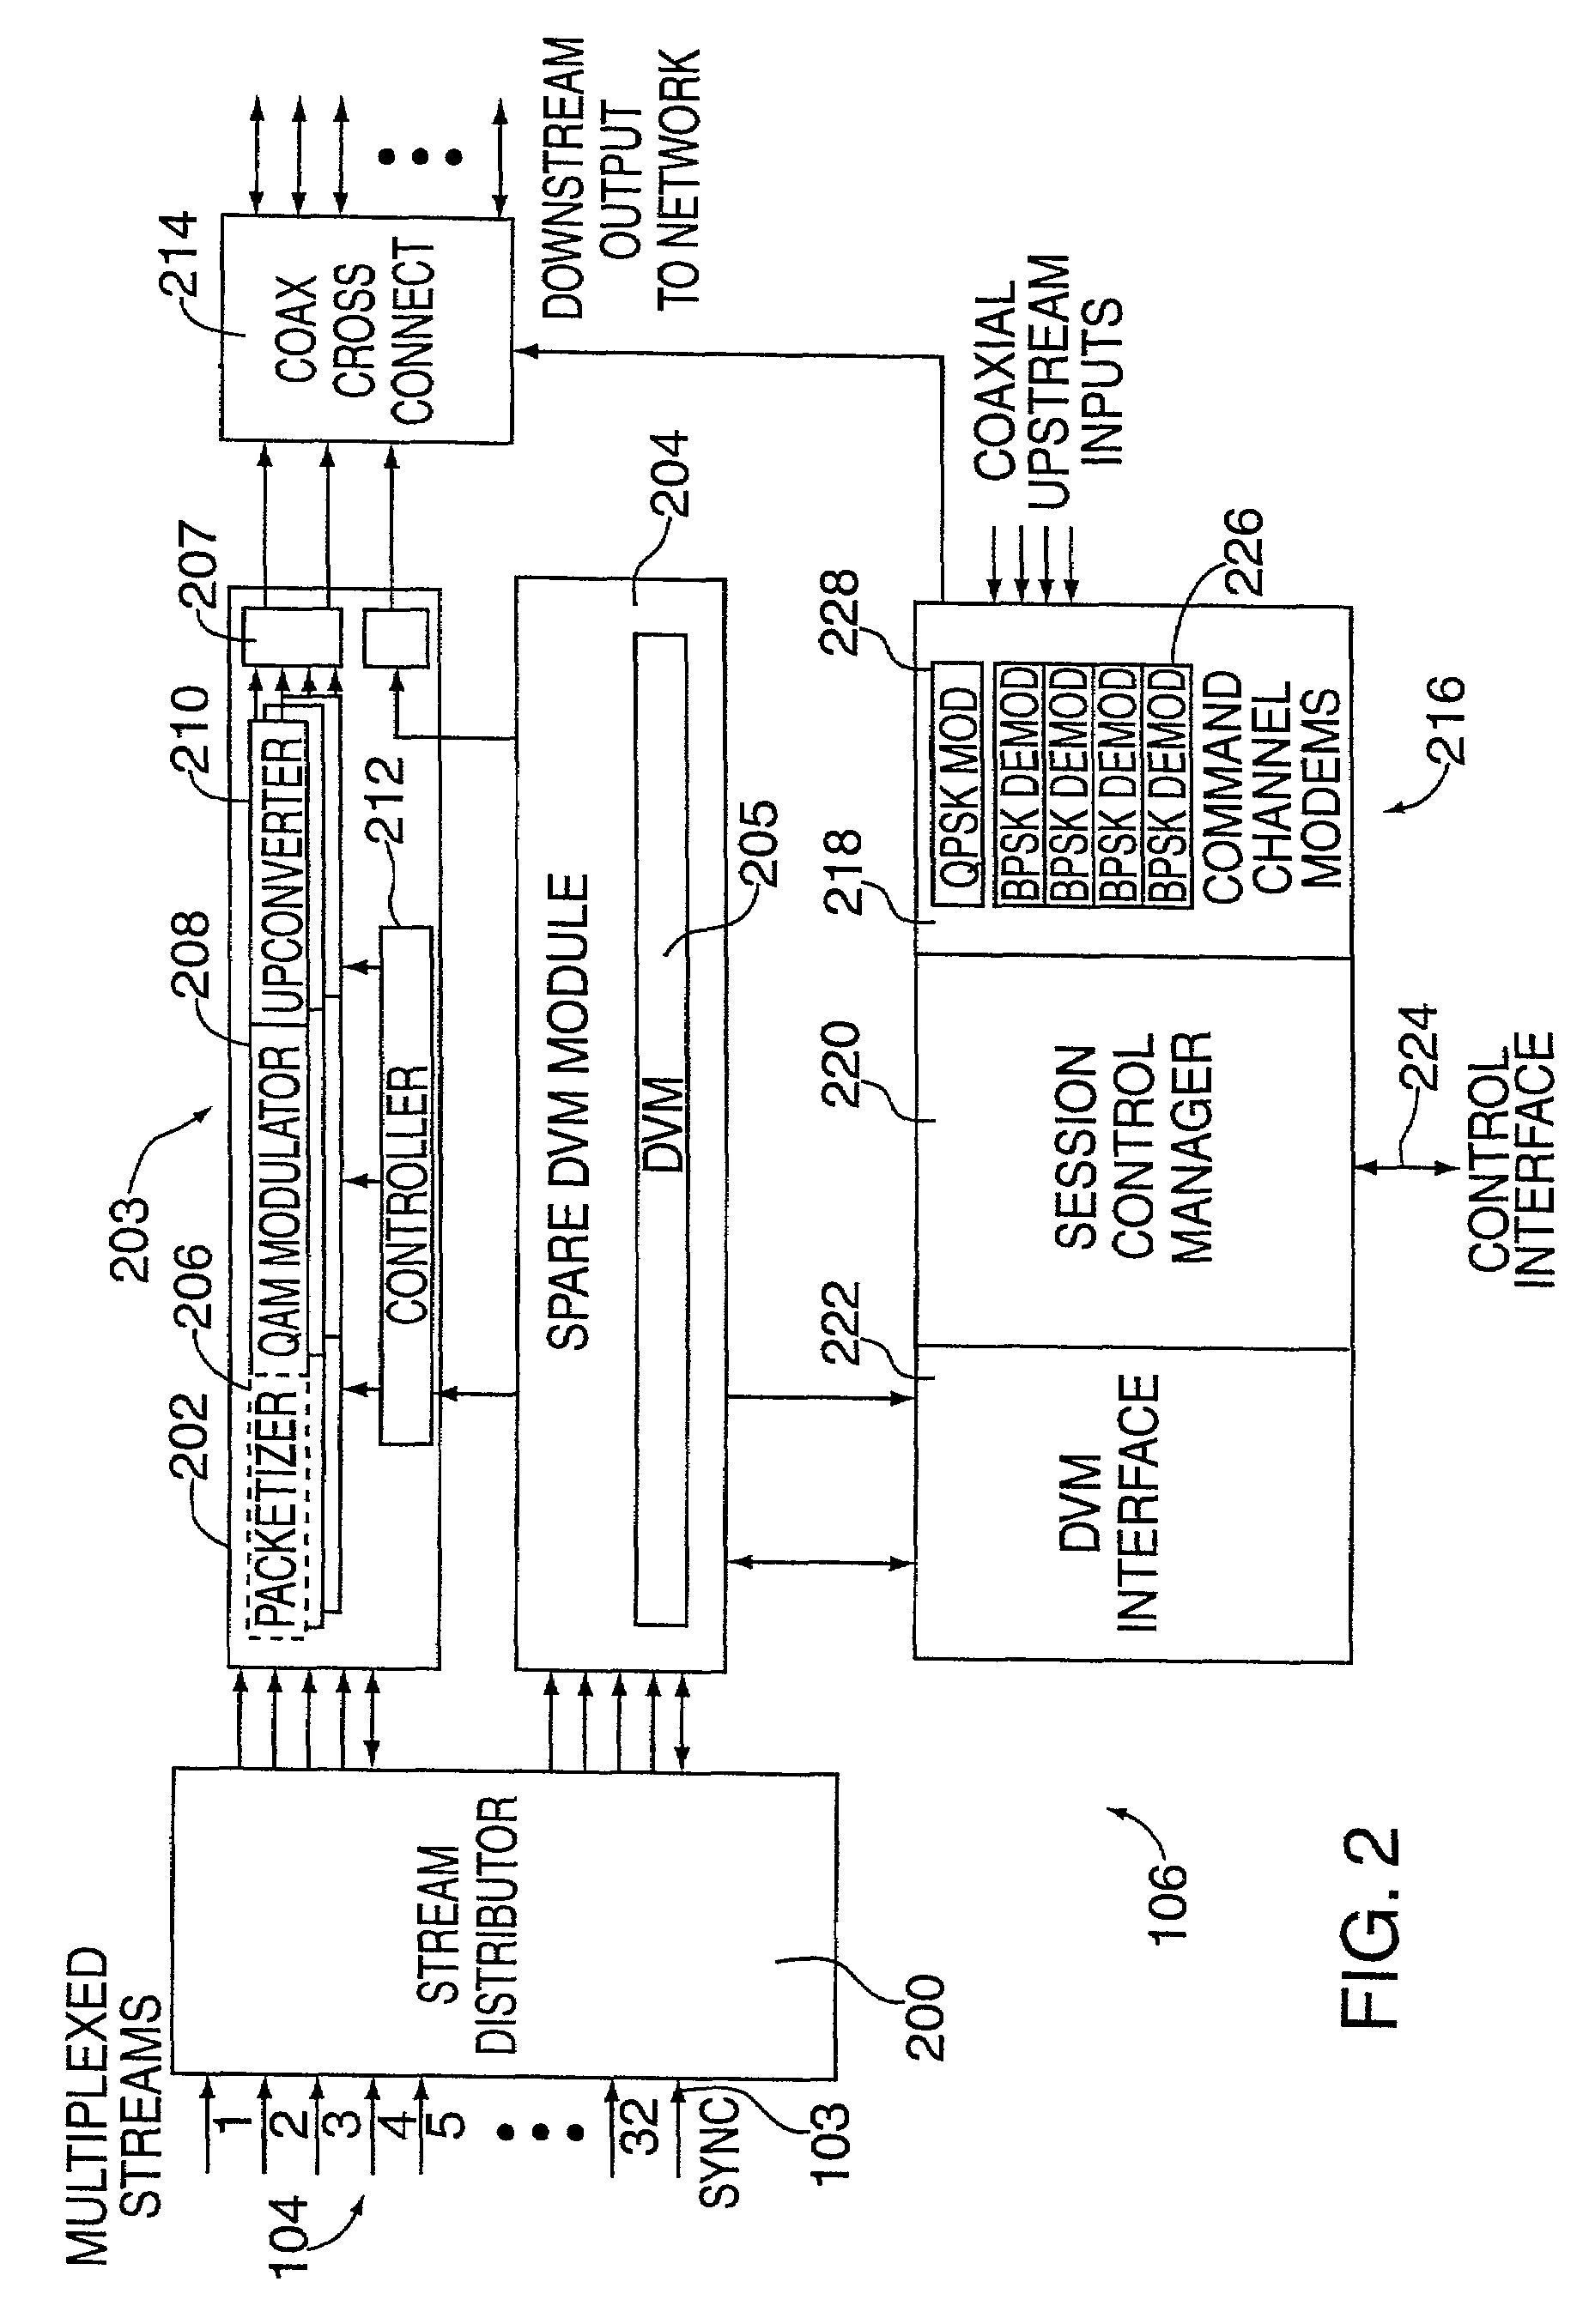 System for interactively distributing information services